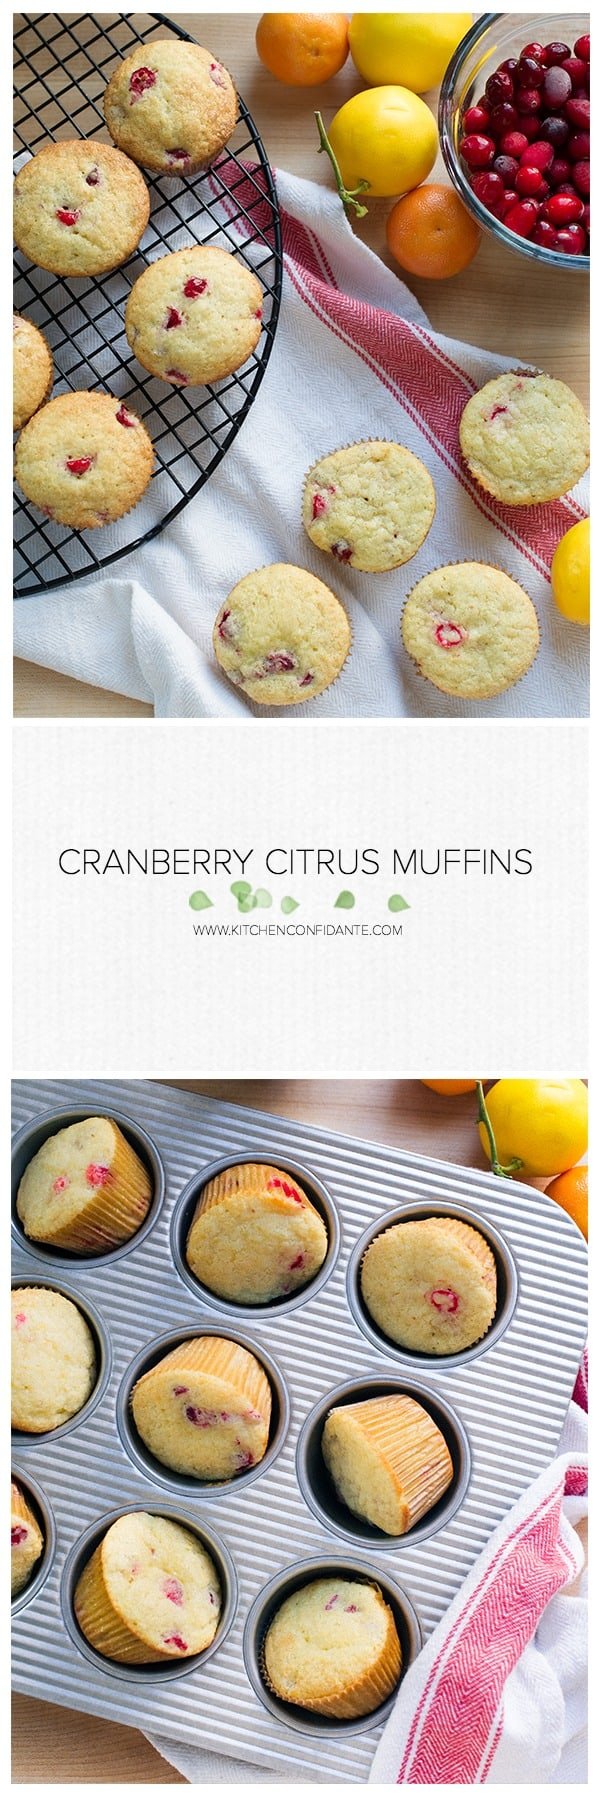 Find some sunshine in the winter with these Cranberry Citrus Muffins! Cranberries add a little zing and a bit of clementine and Meyer lemons add brightness!